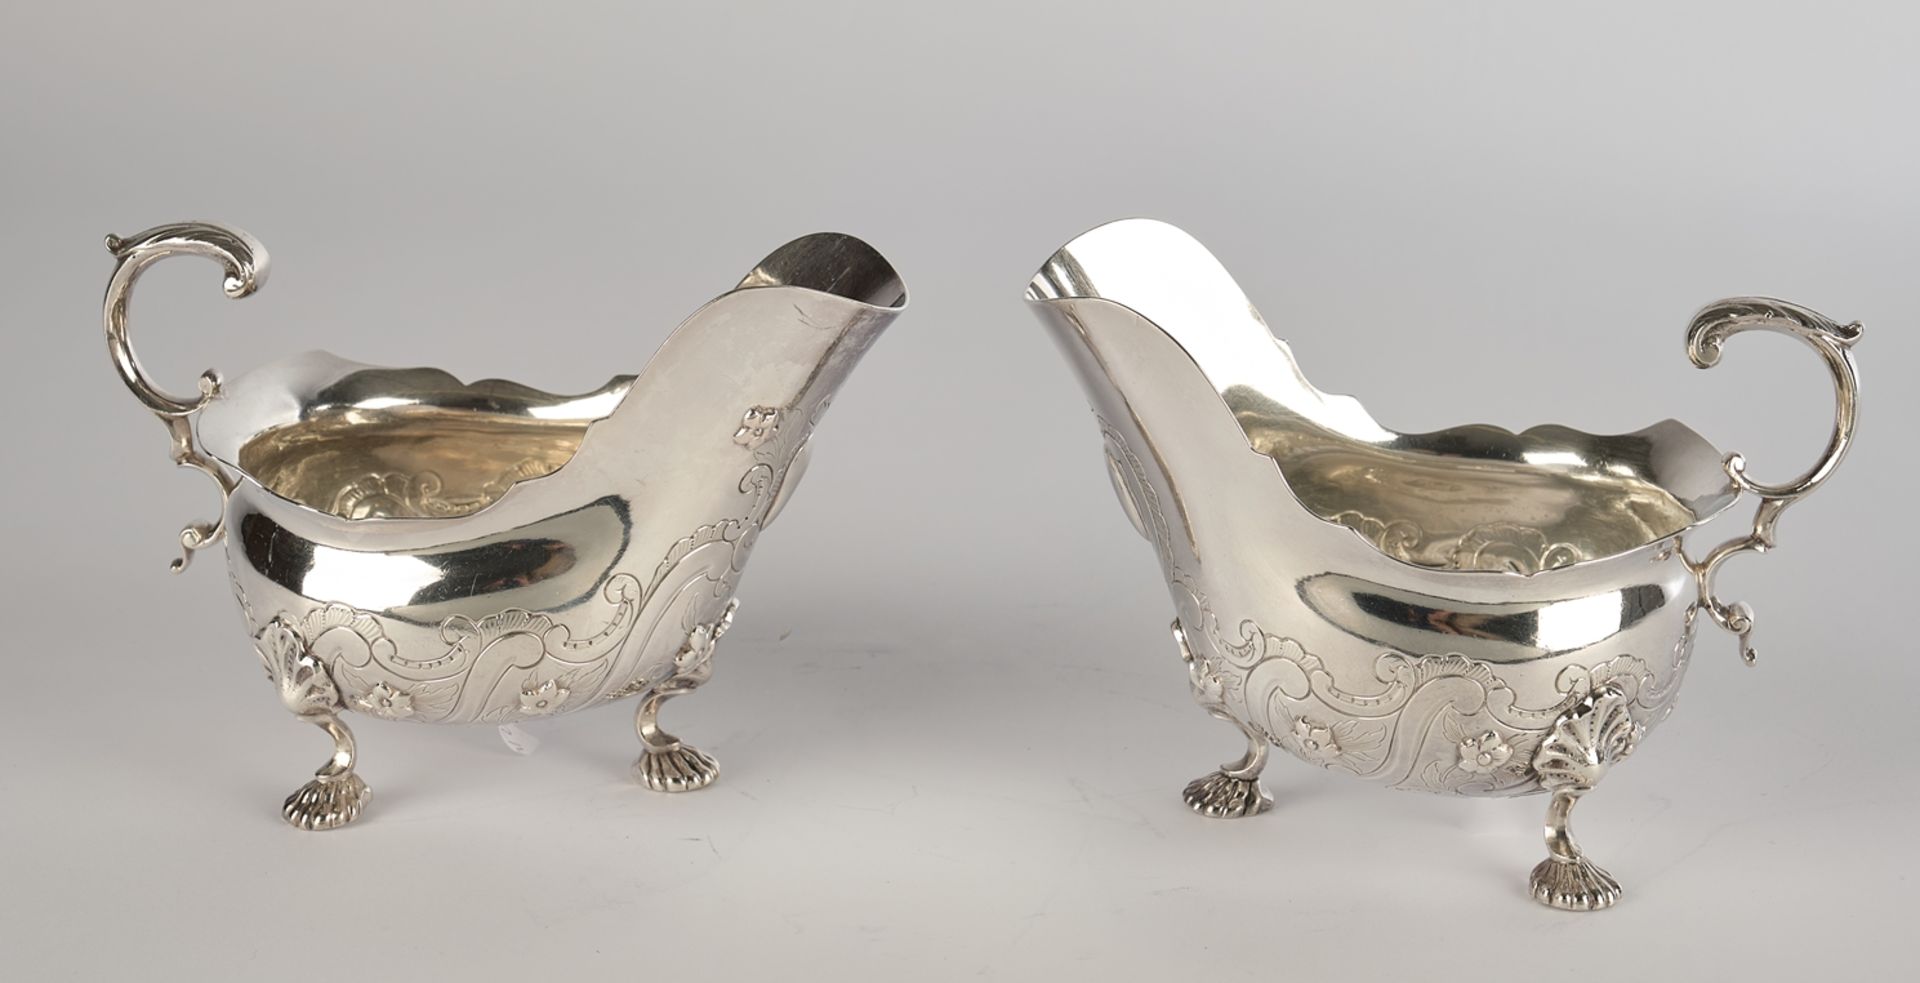 Pair of saucers, silver, mark, Dutch import tax mark, rococo decoration, vessels with wide spouts, 